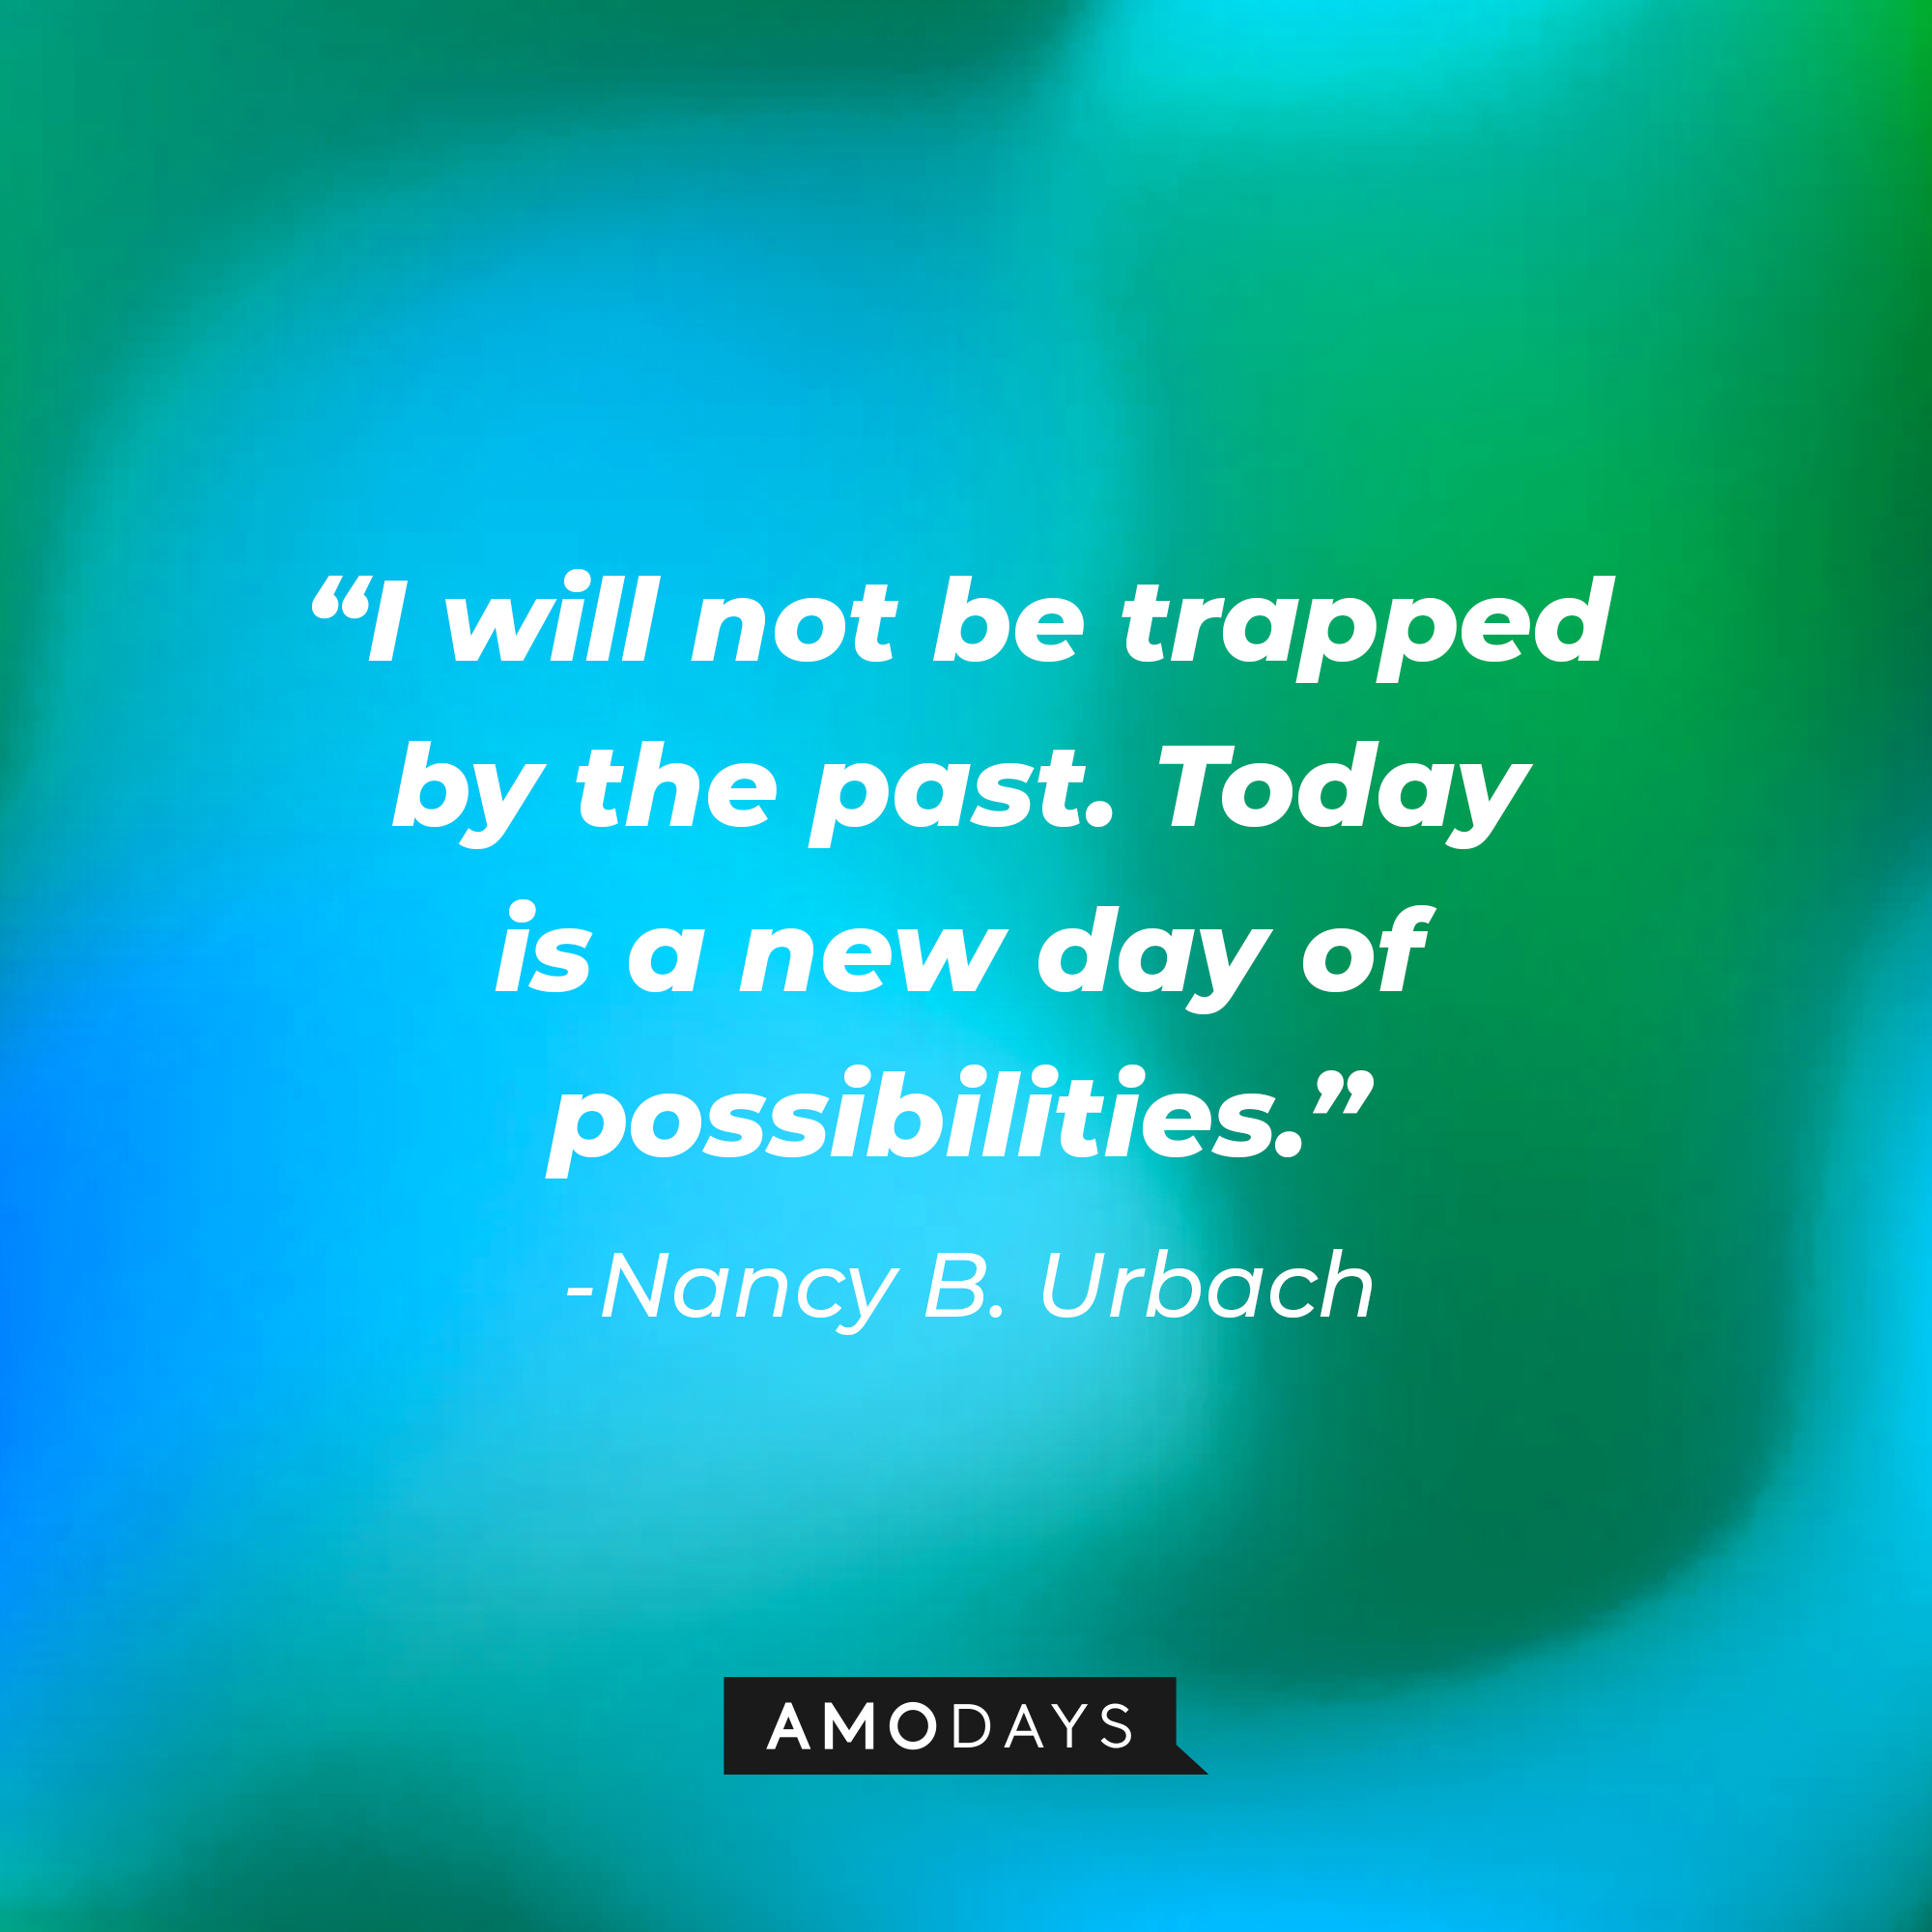 Nancy B. Urbach’s quote: "I will not be trapped by the past. Today is a new day of possibilities."  | Image: Amodays